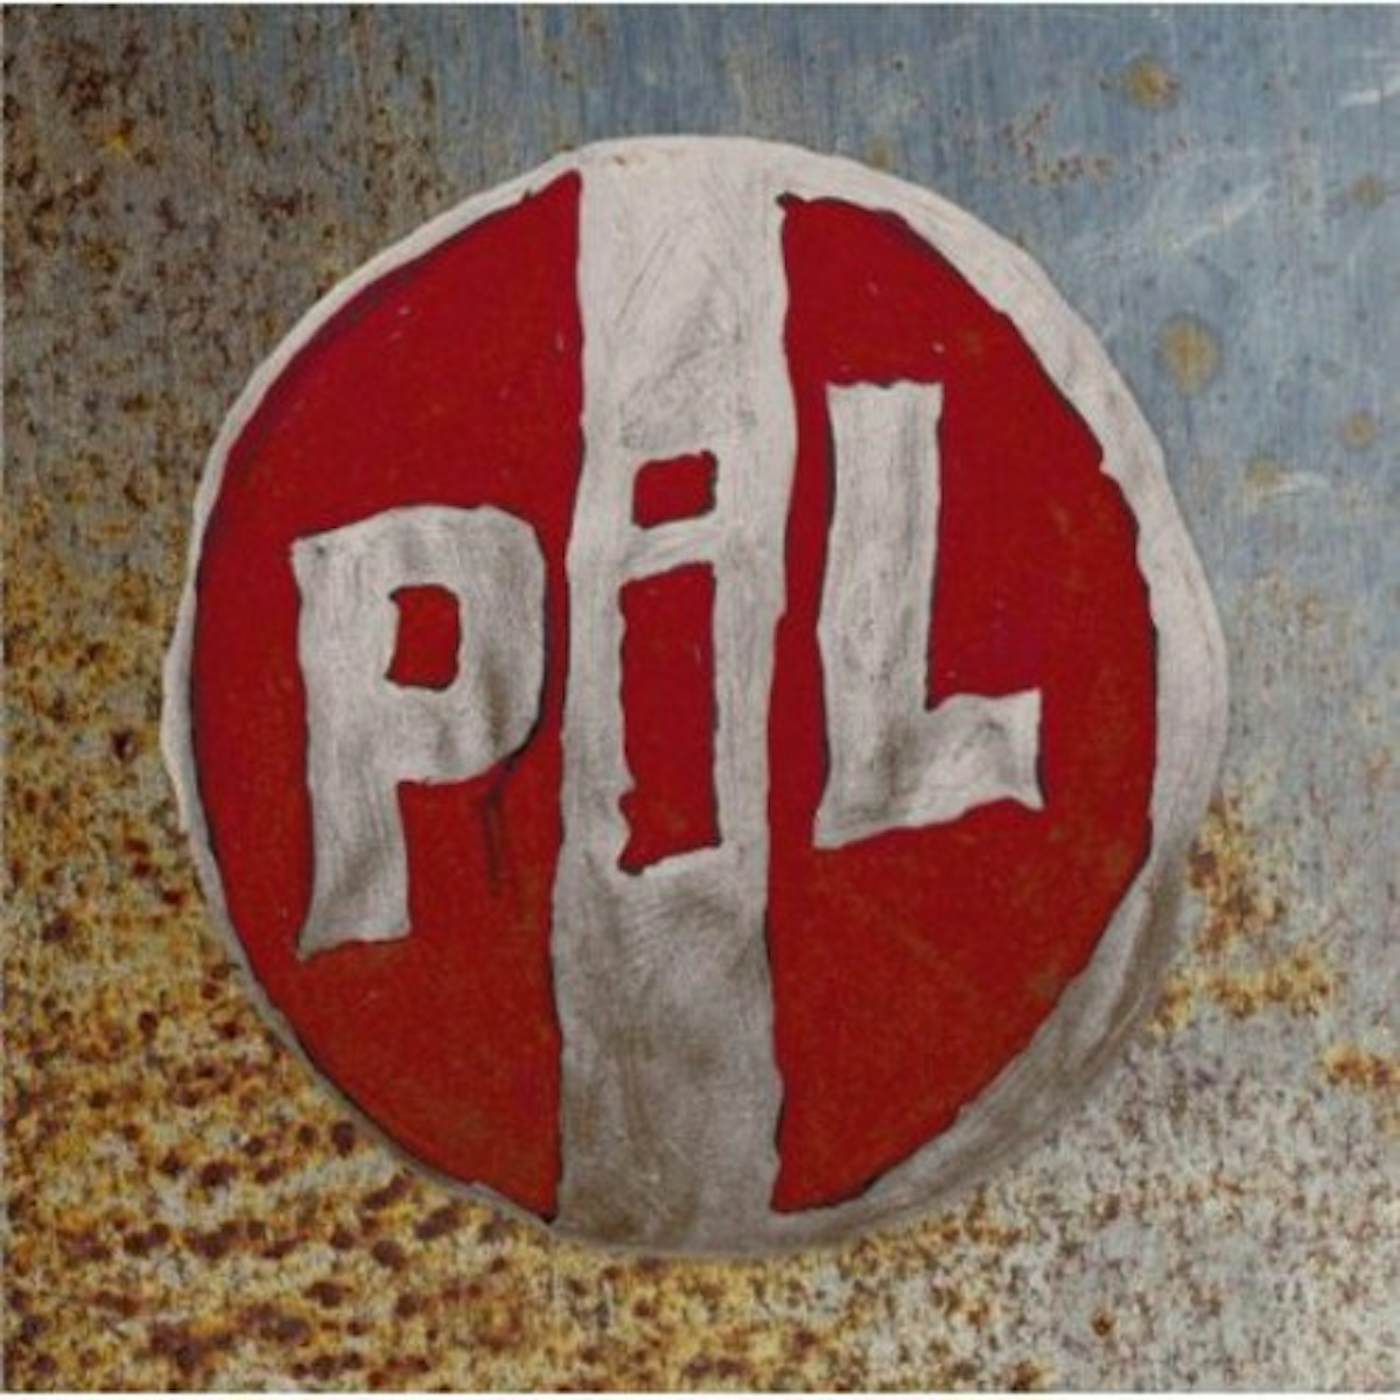 Public Image Ltd. OUT OF THE WOODS / REGGIE SONG CD